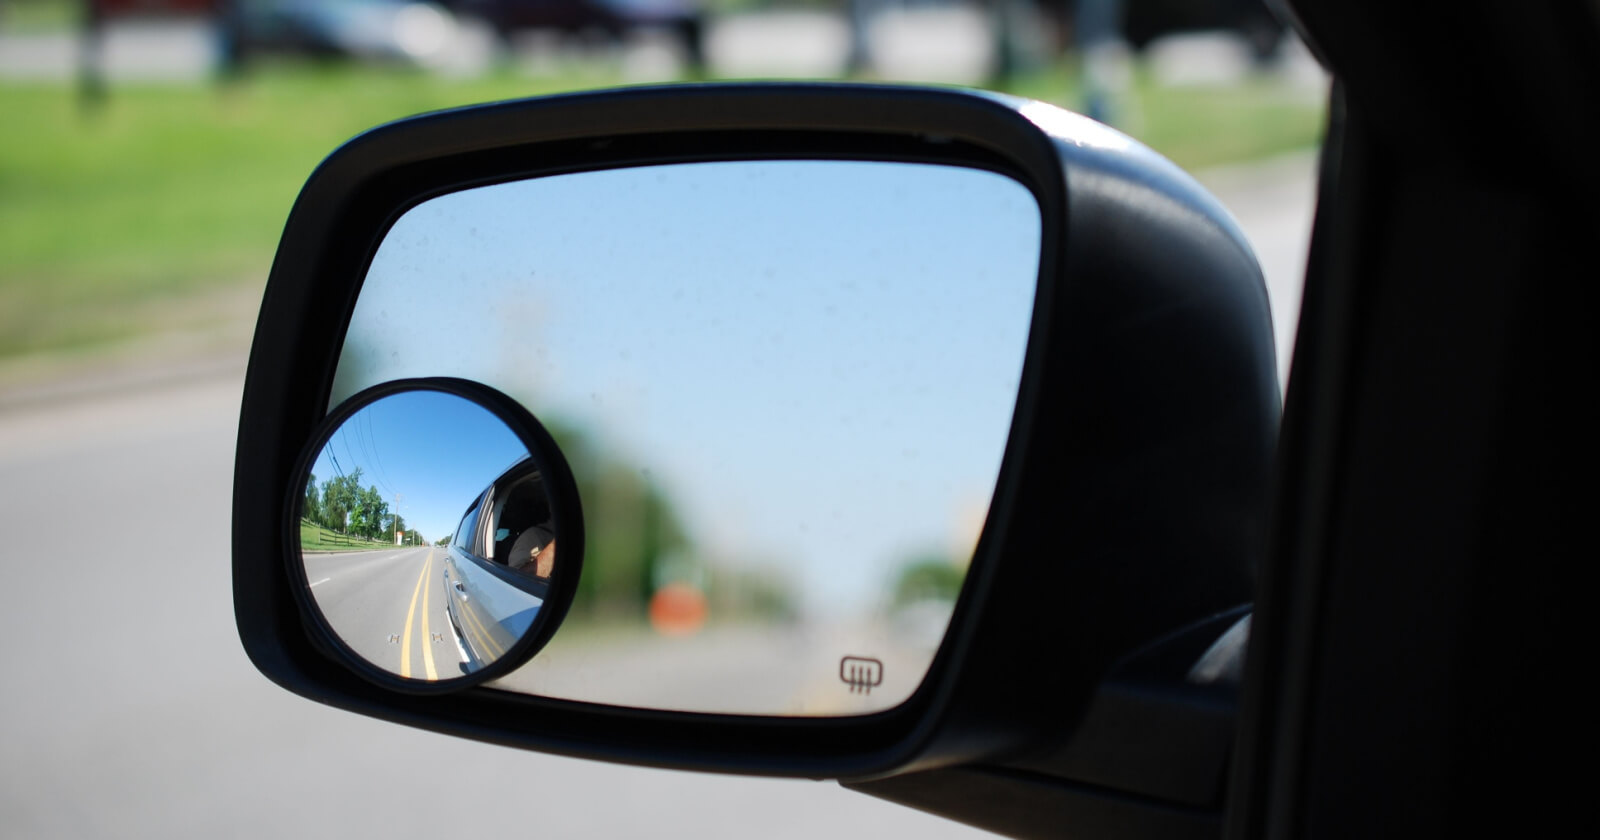 Why Do We Prefer a Convex Mirror in Vehicles? Rear View Mirror in